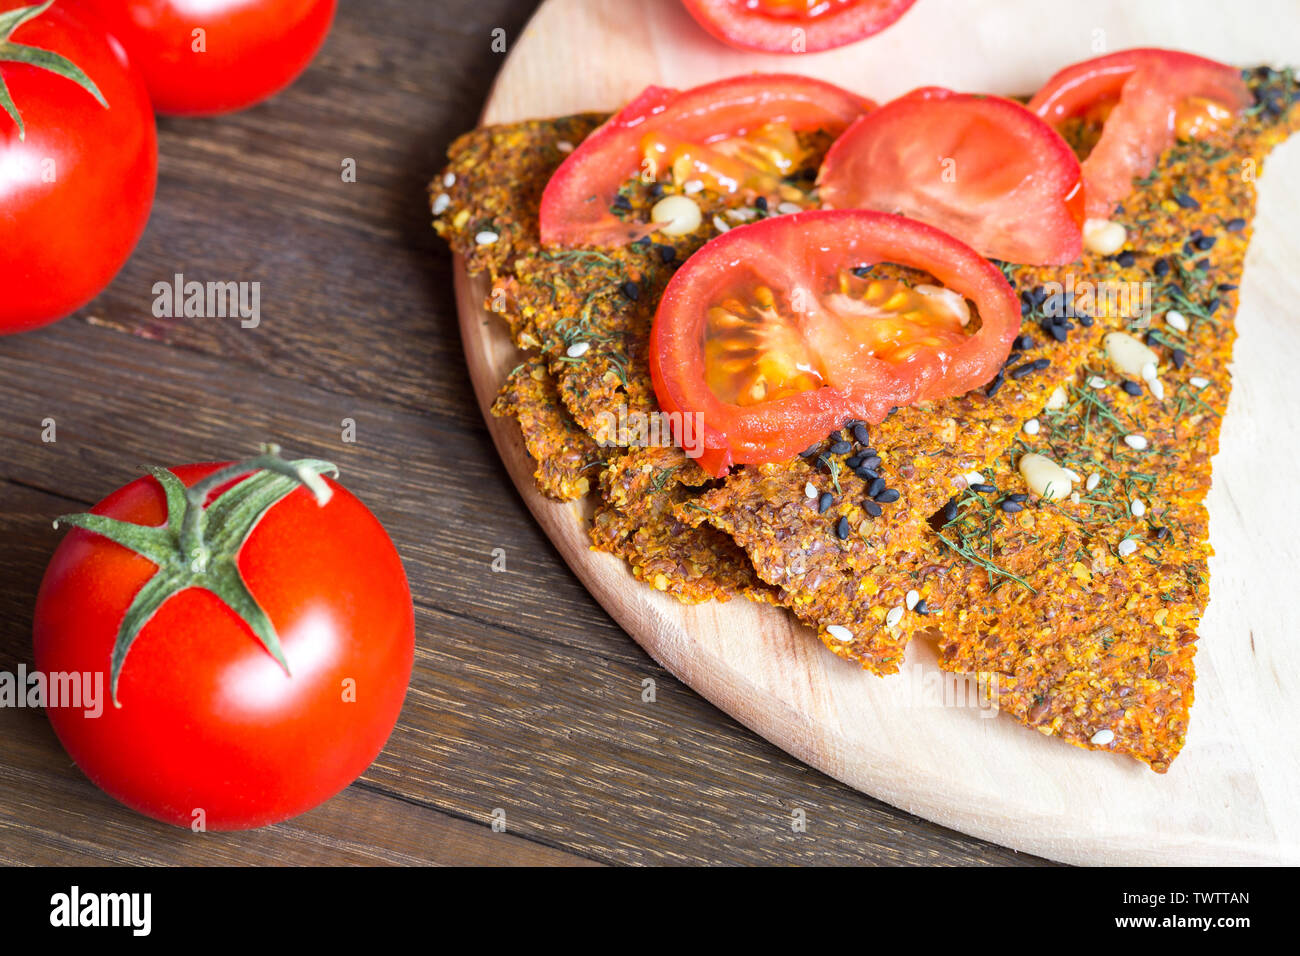 Delicious vegan crisp bread with tomatoes on wooden background. Fast raw diet snack. Close-up. Selective focus on foreground. Top angle view. Healthy Stock Photo